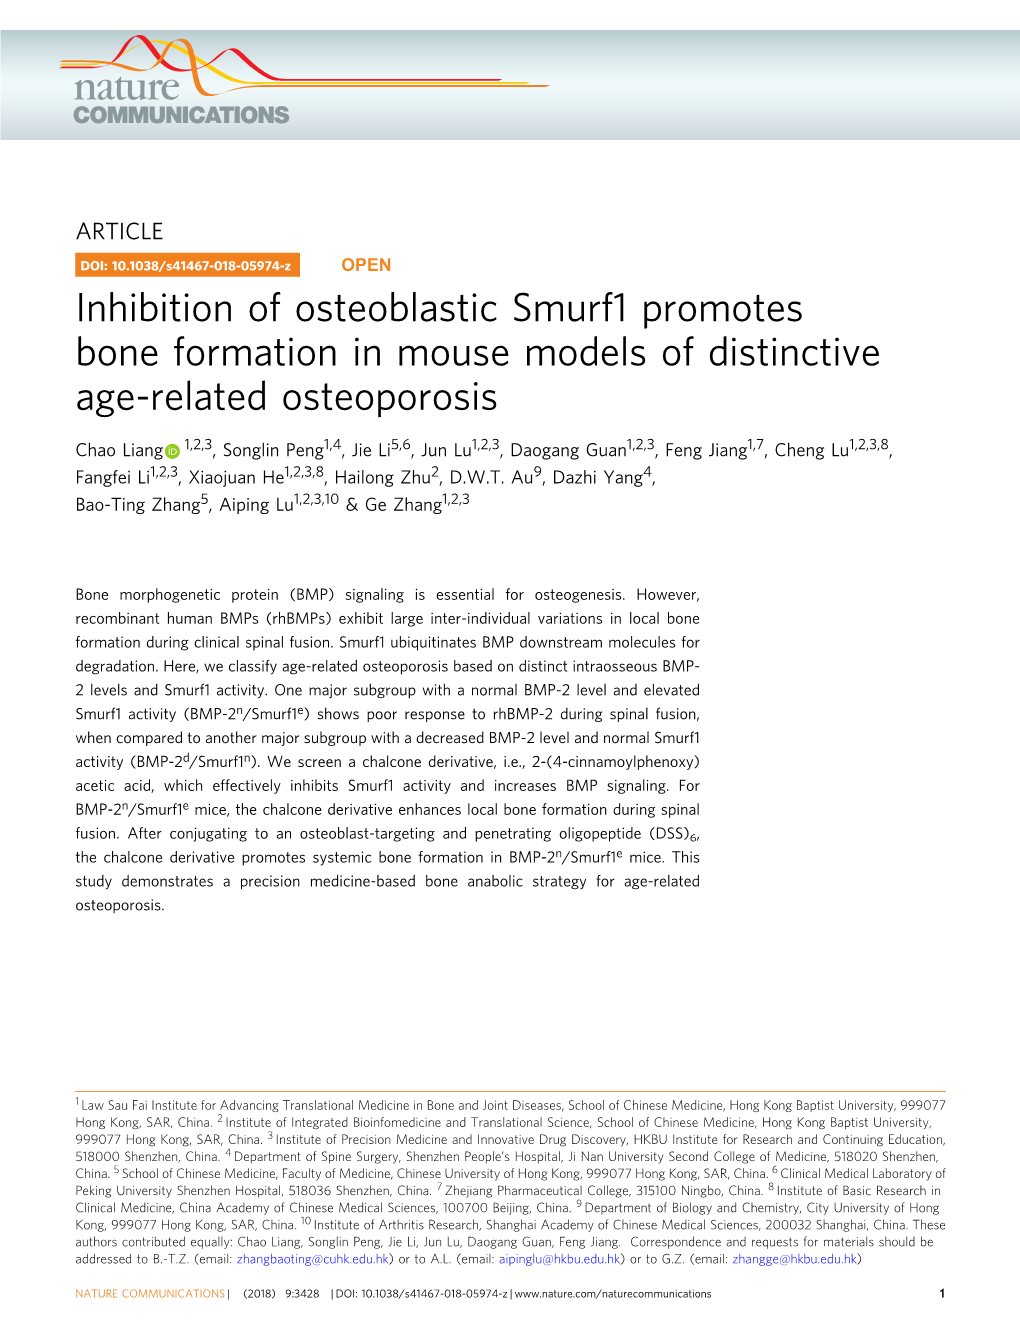 Inhibition of Osteoblastic Smurf1 Promotes Bone Formation in Mouse Models of Distinctive Age-Related Osteoporosis